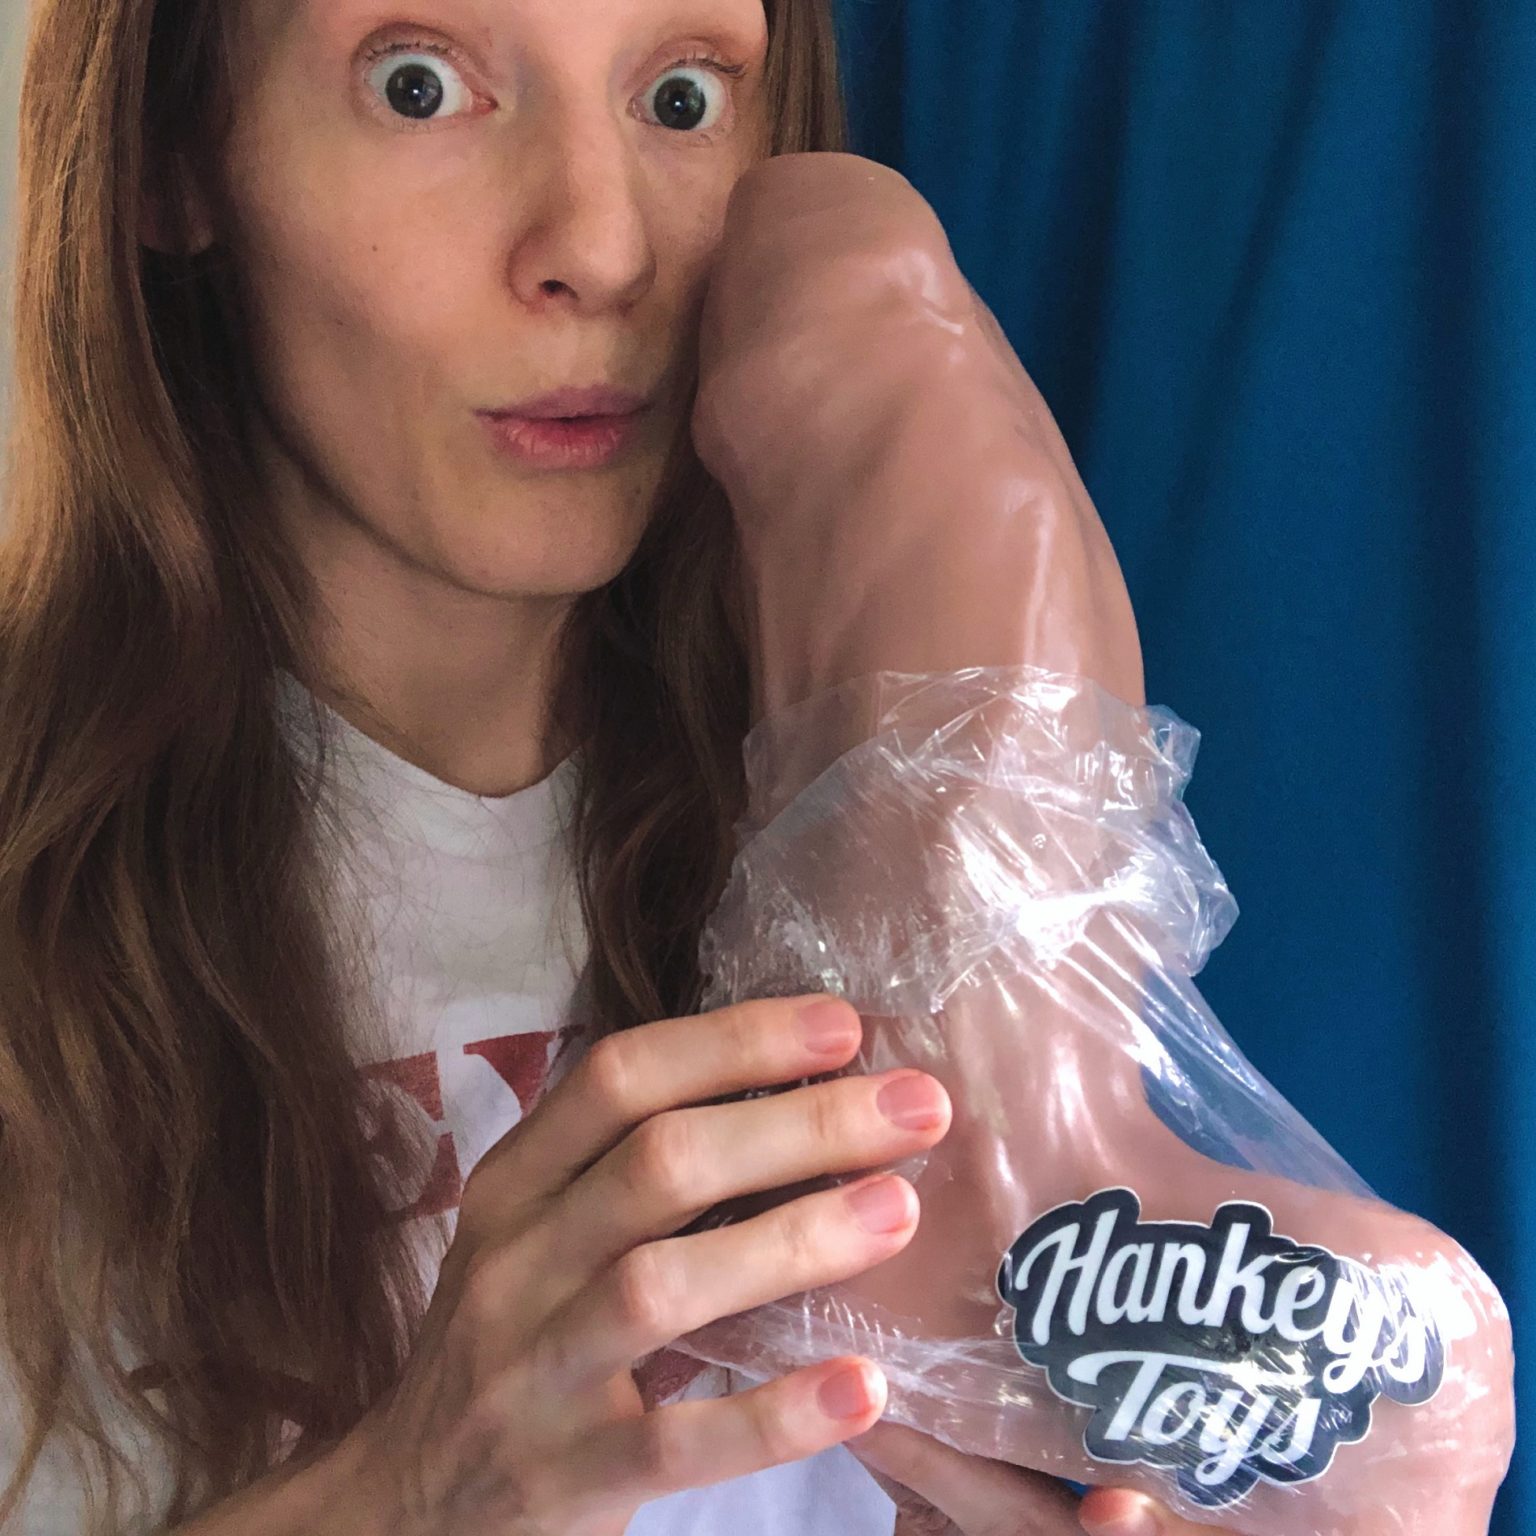 Review Goliath Dildo By Mr Hankey S I Rode A Giant Sex Toy Phallophile Reviews